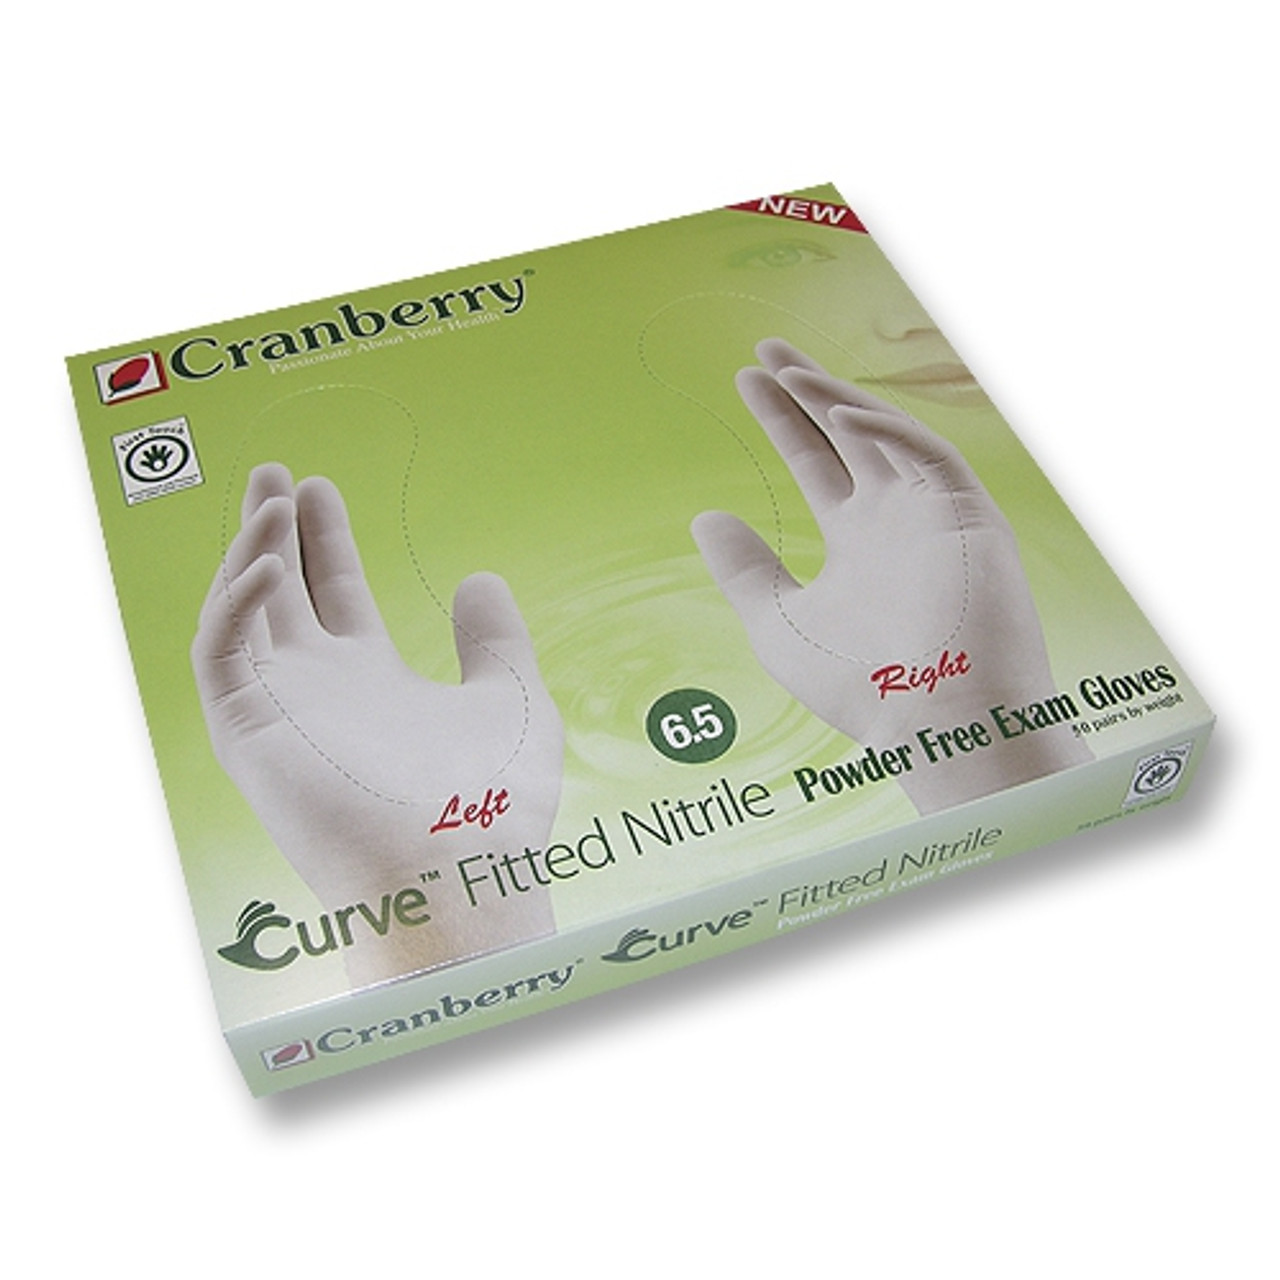 Cranberry Curve White Nitrile, Pwd-Free Fitted Glove S/M - 7.0, 50prs/bx